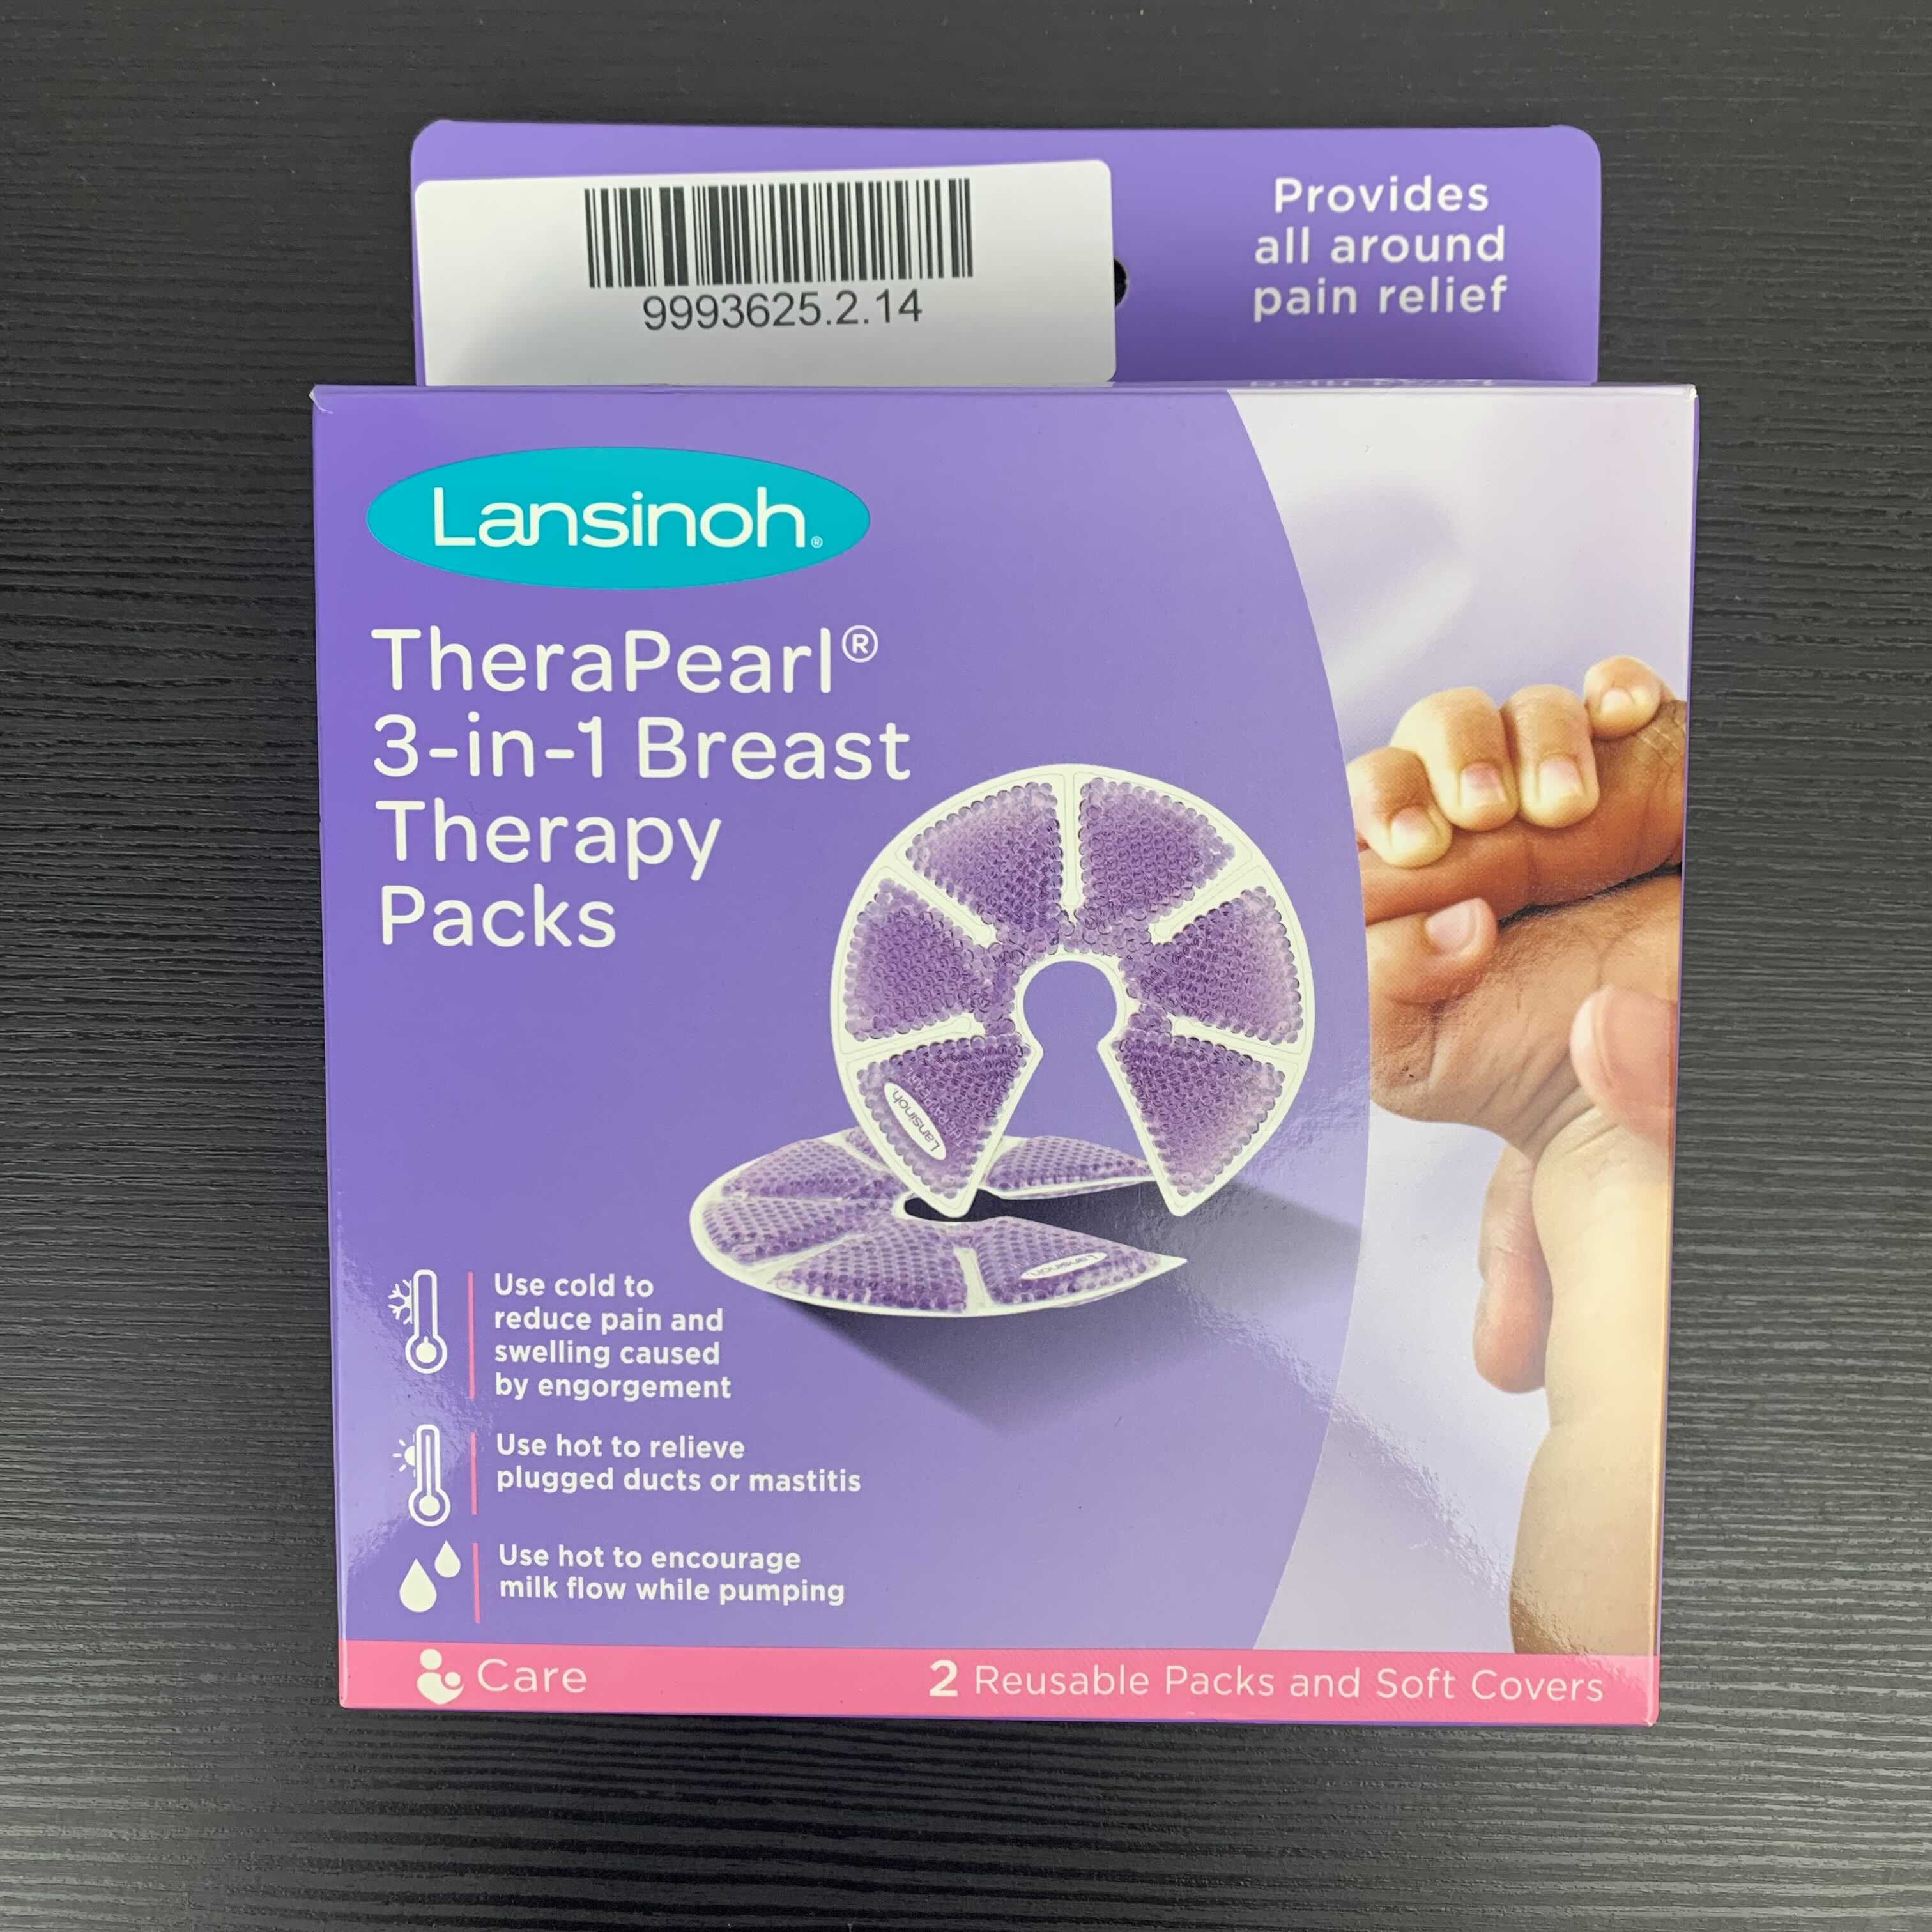 Lansinoh Therapearl 3-in-1 Breast Therapy Packs With Soft Covers